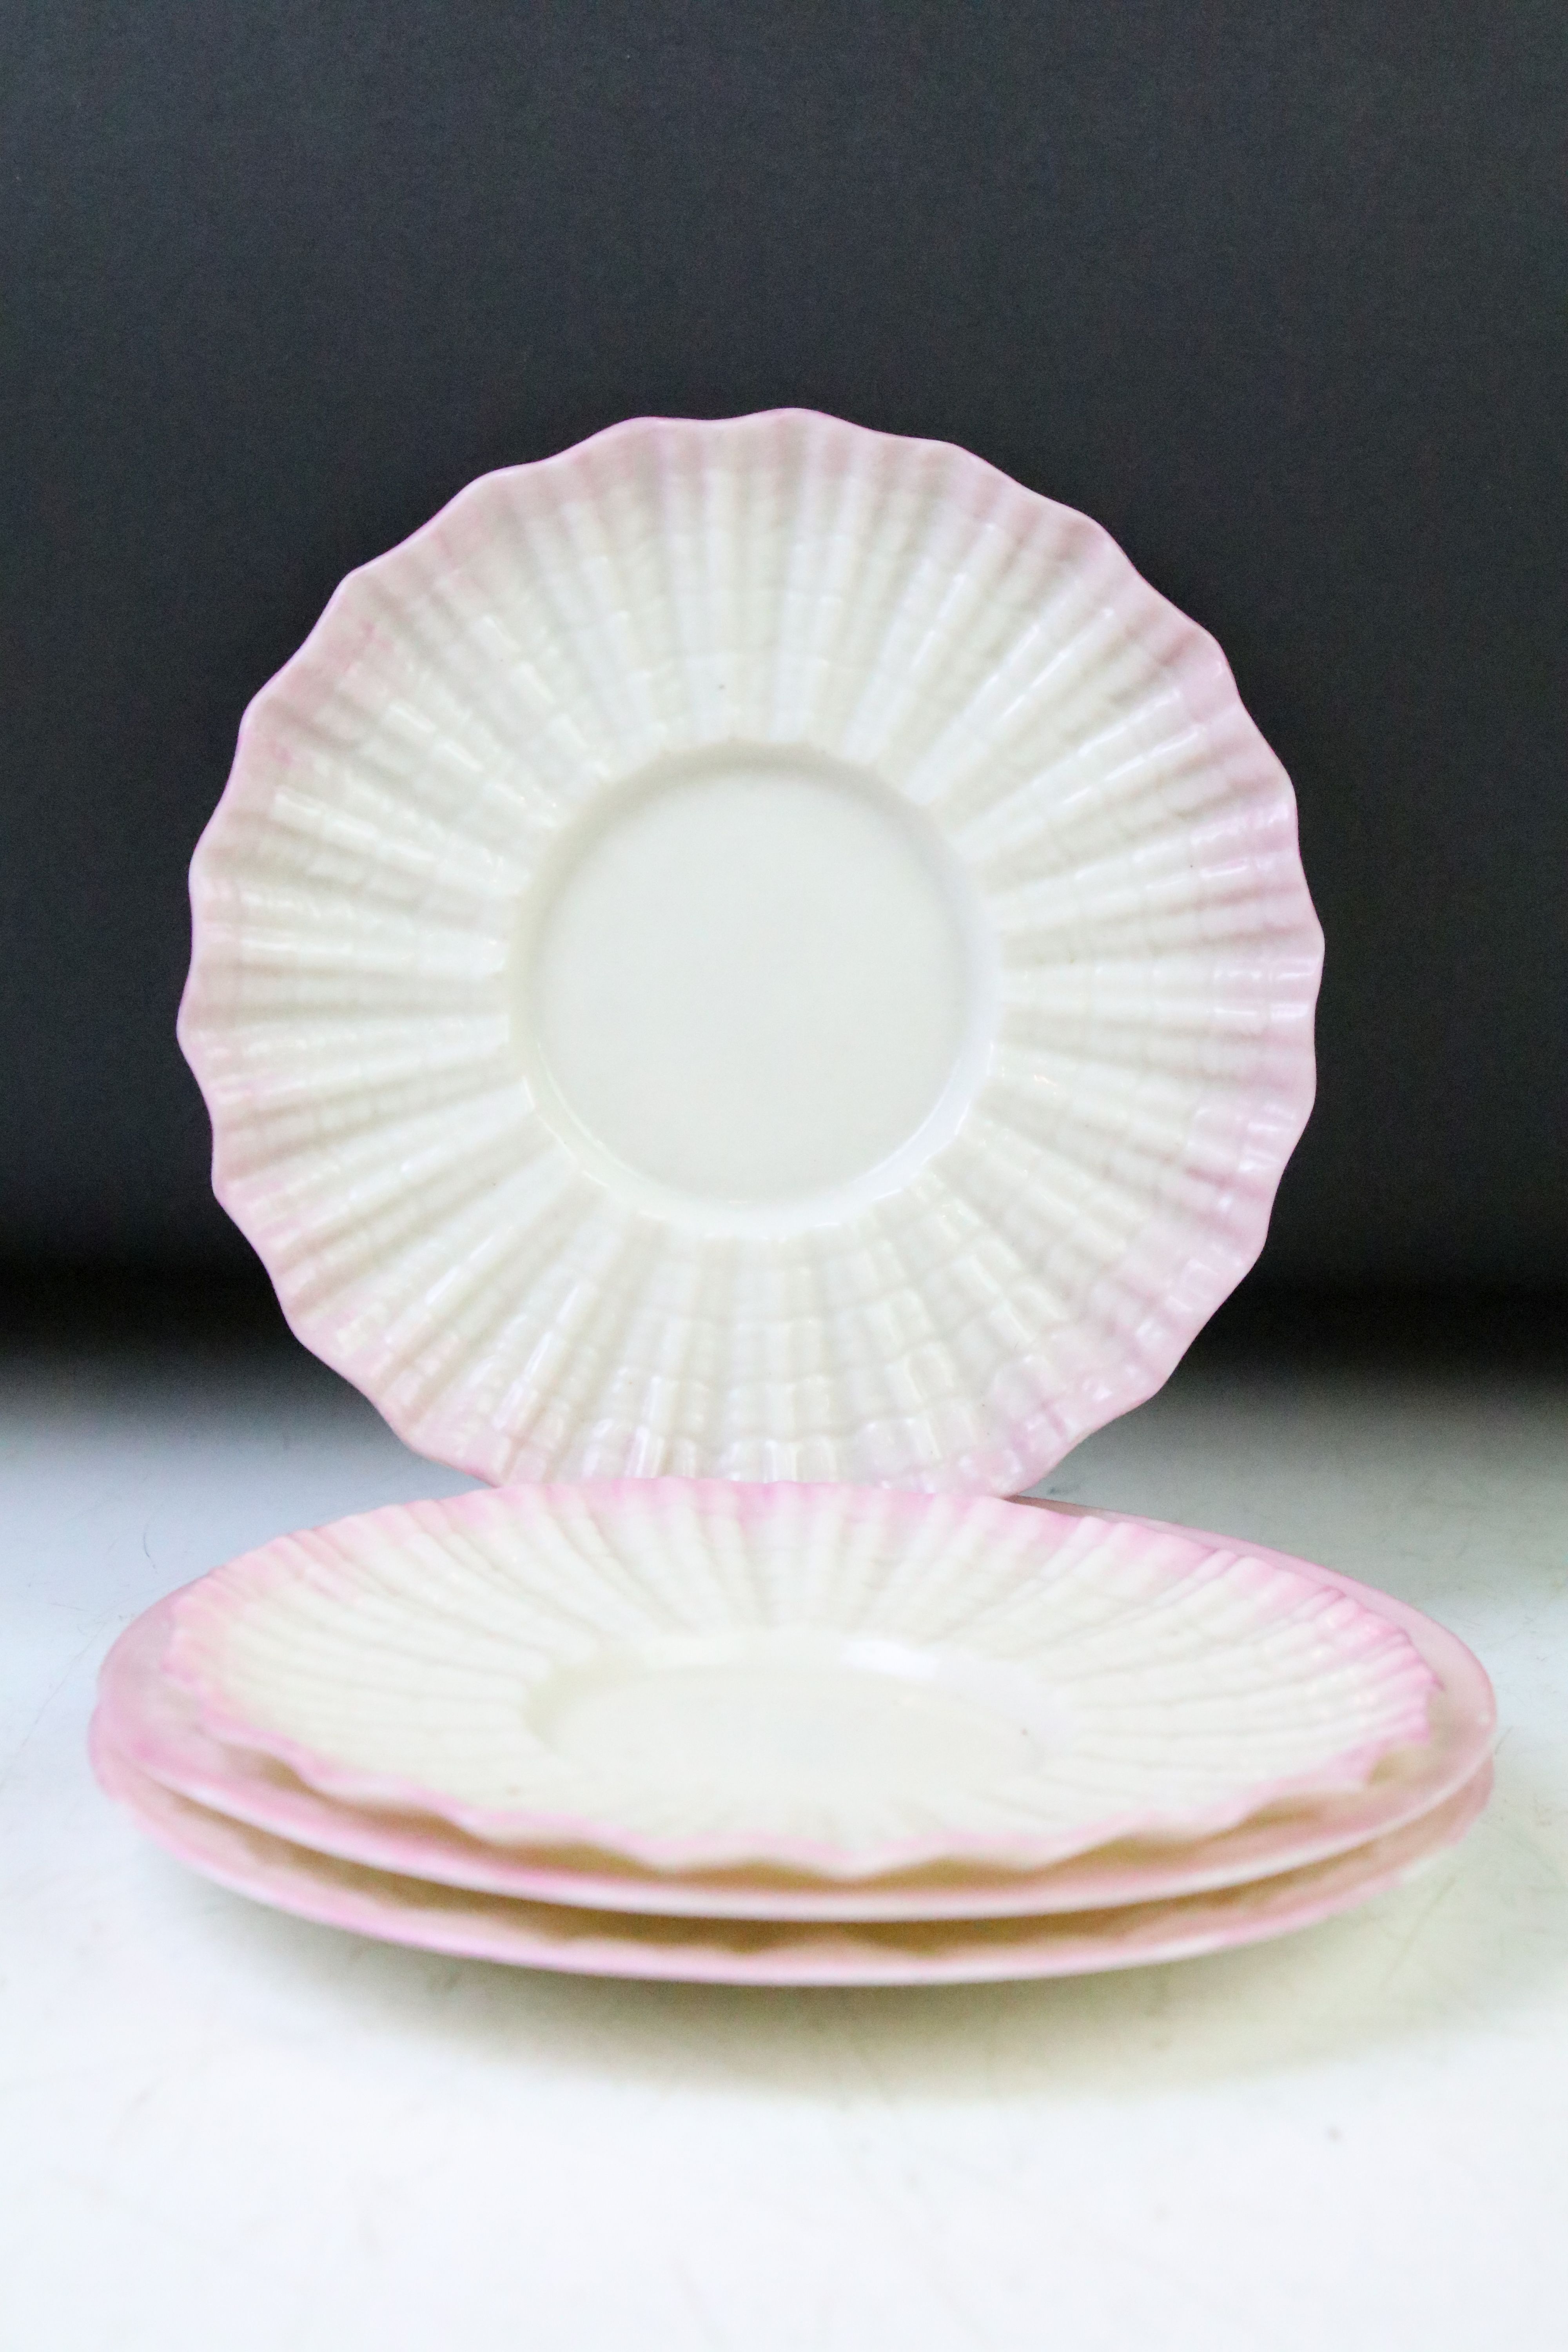 Late 19th / early 20th C Belleek Porcelain 'Neptune' pink shell pattern cabaret tea set for two, - Image 10 of 13